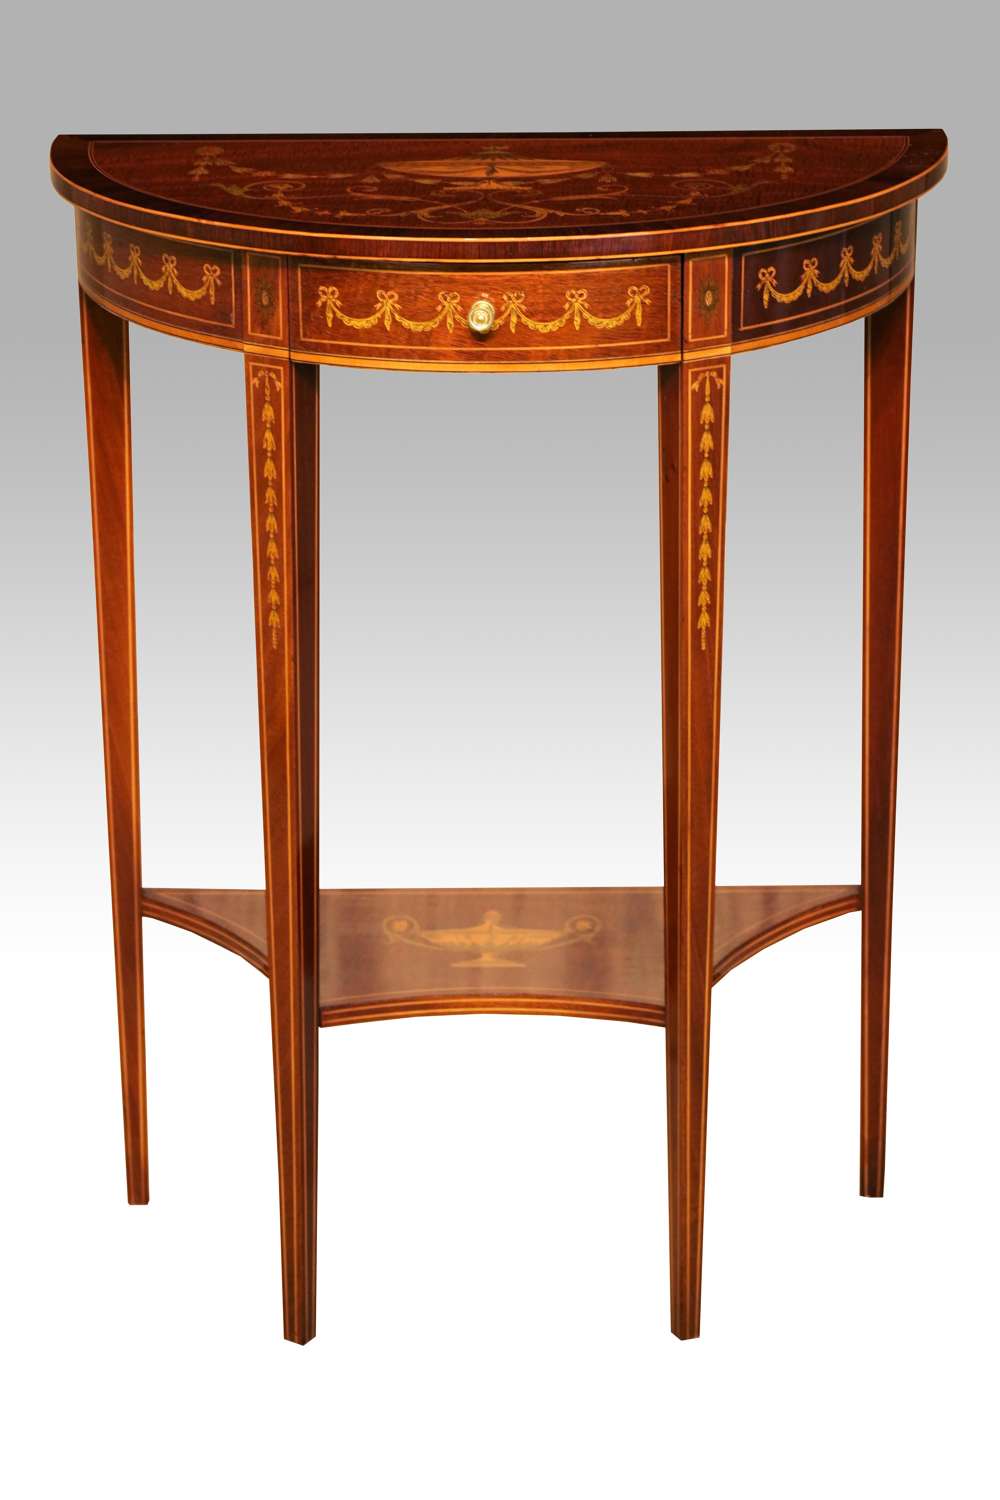 An Exhibition Quality Late Victorian Mahogany Inlaid Demi Lune Table